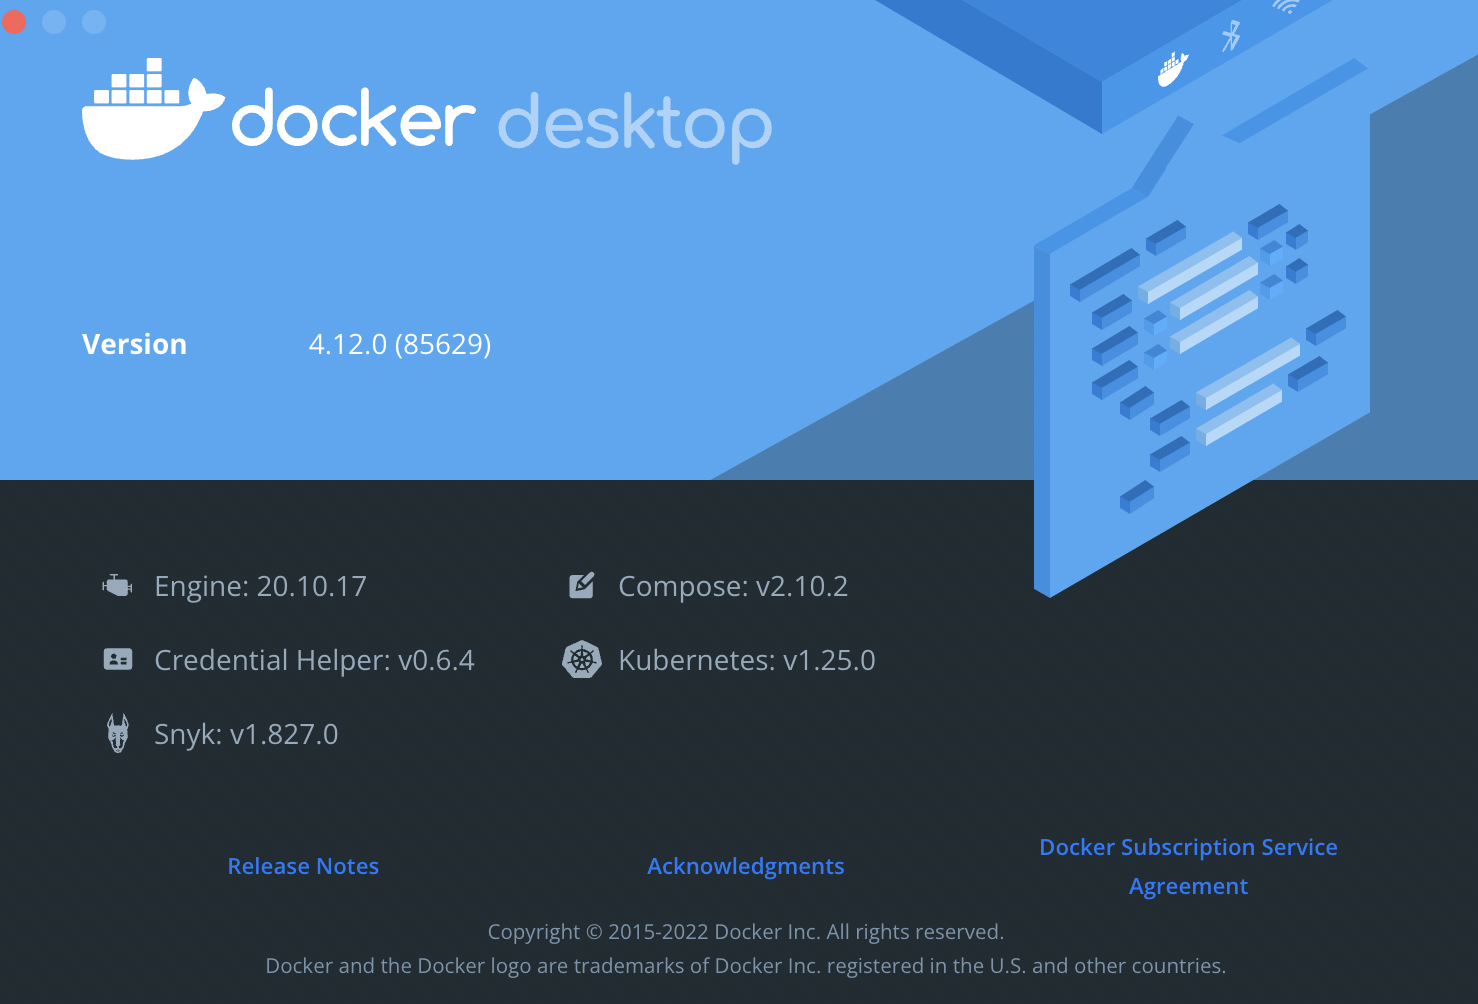 5 New Features of Docker Desktop that You Should be Aware of